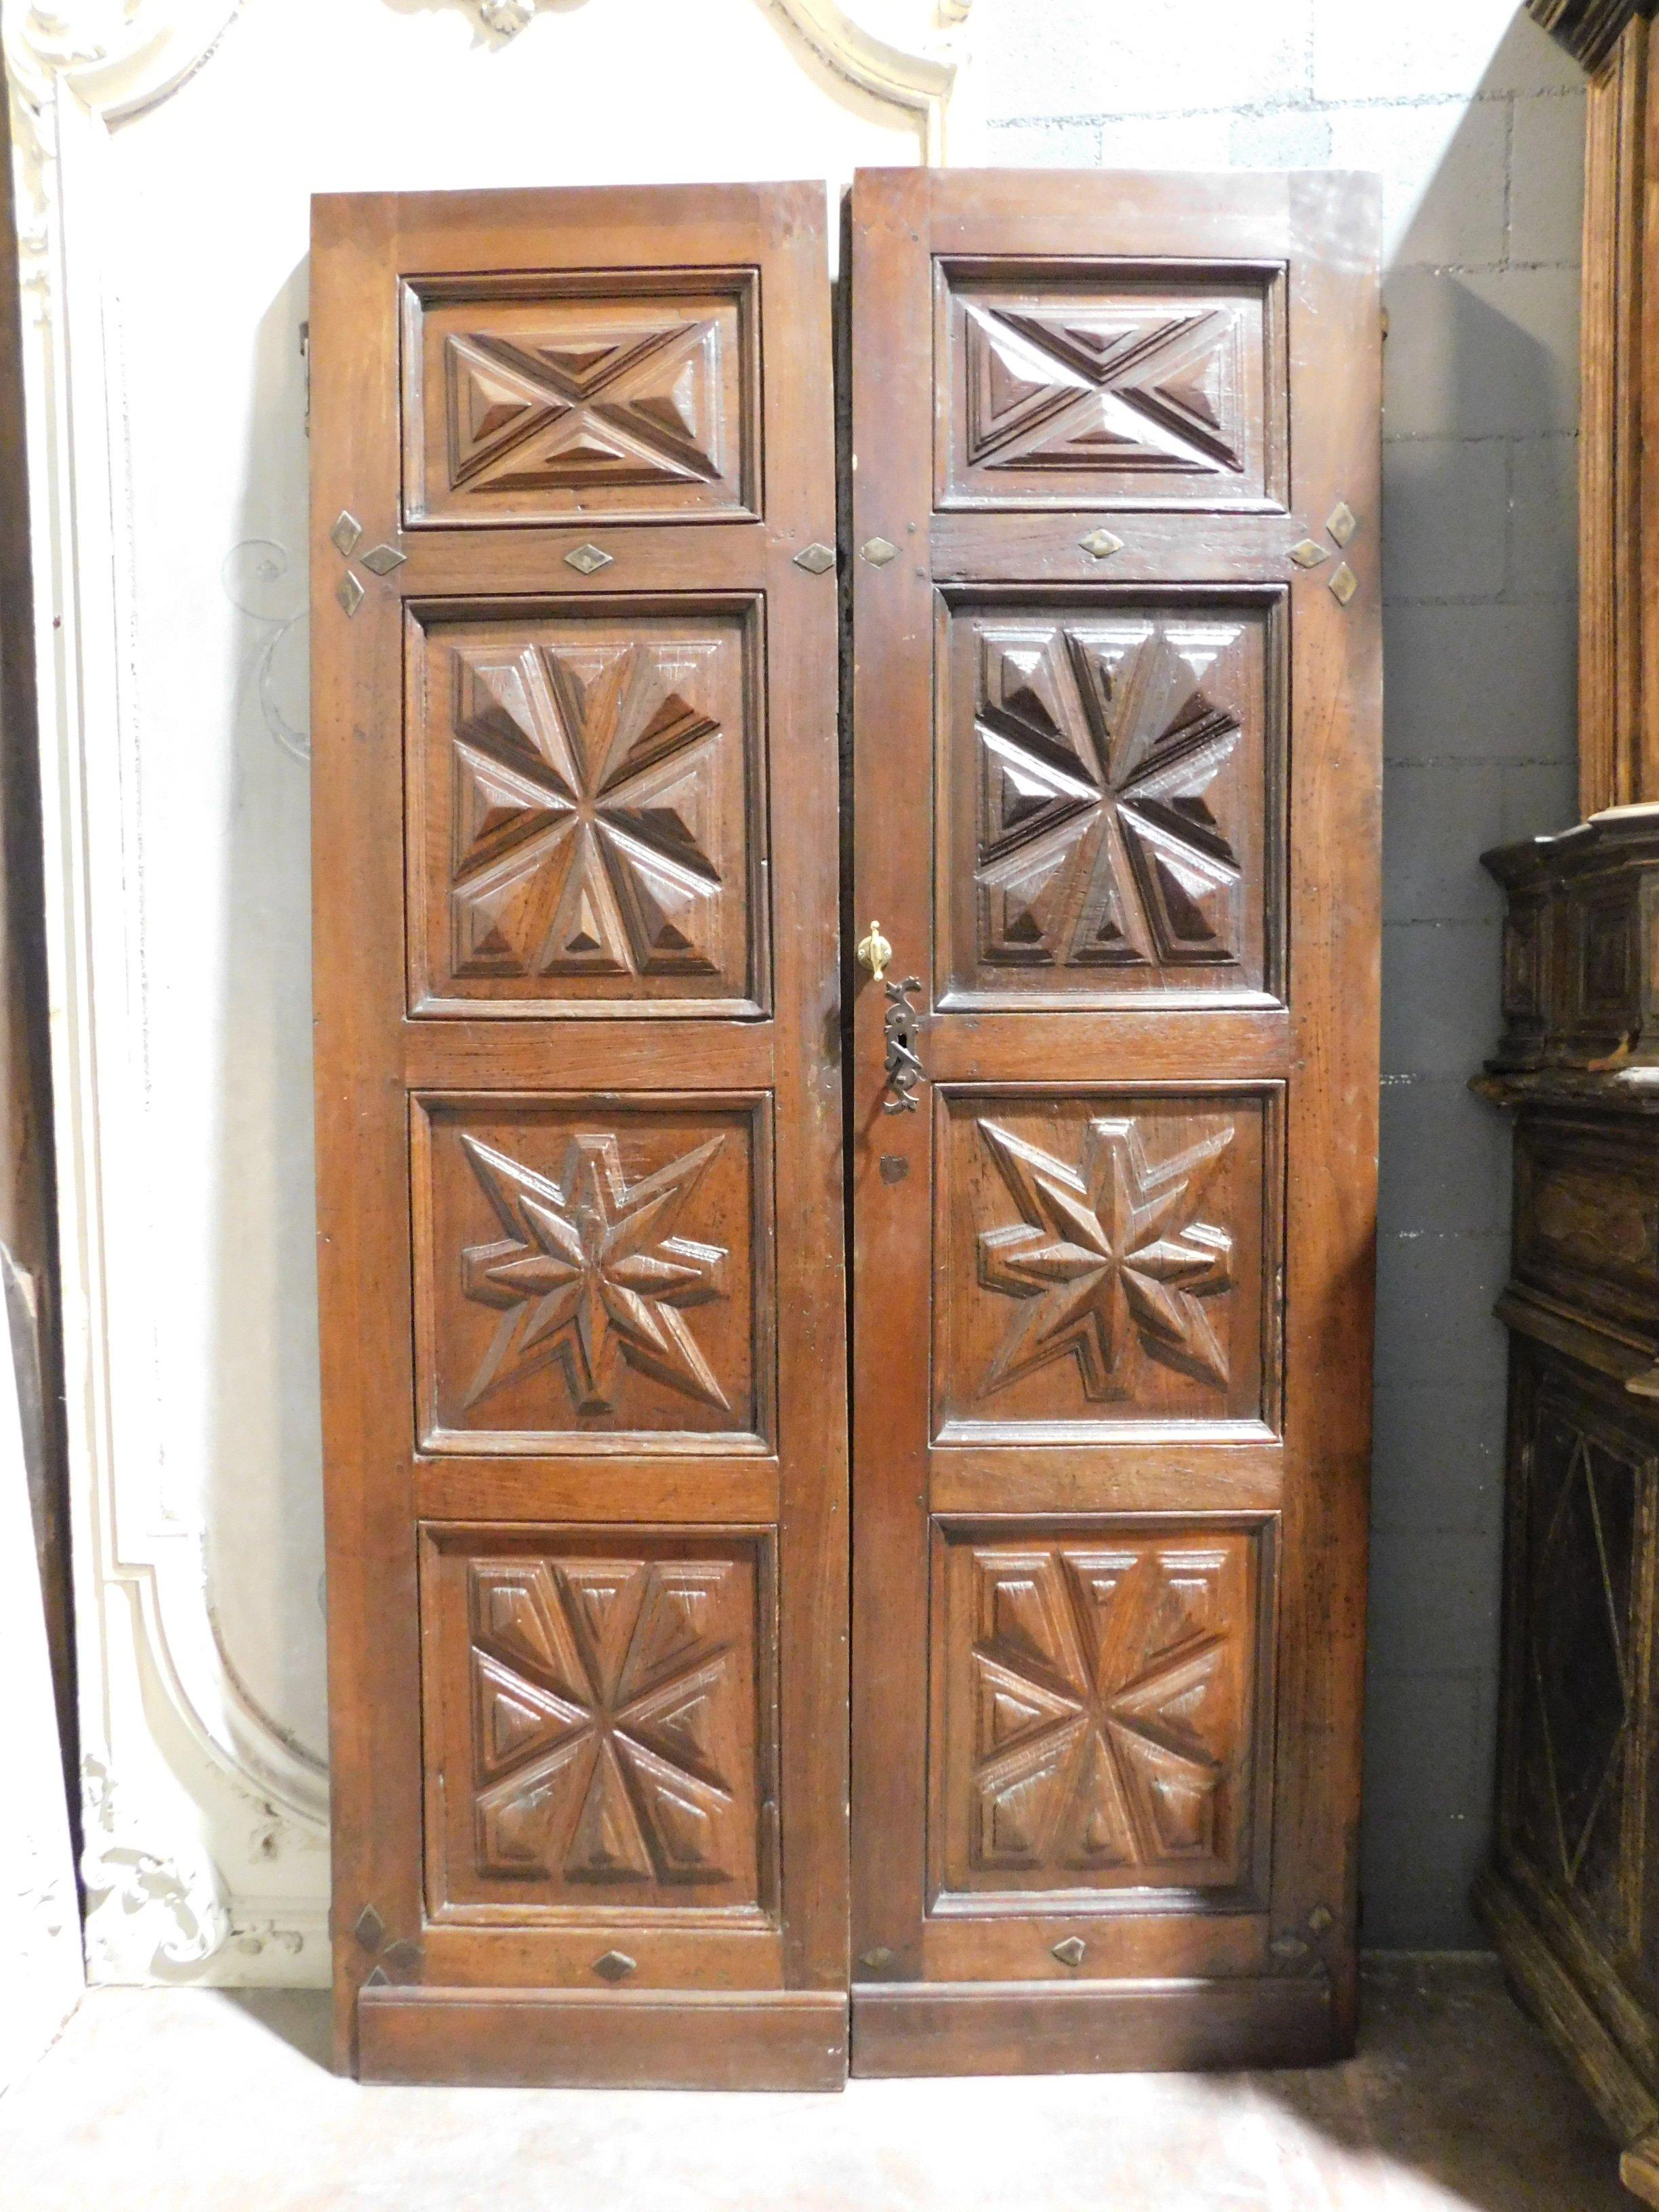 Antique entrance door, double-winged, hand-carved in walnut with diamond design panels, built in the 17th century in Italy.
Entrance door of a probable noble house in the Italian historic center,
very precious, diamond design that few wealthy